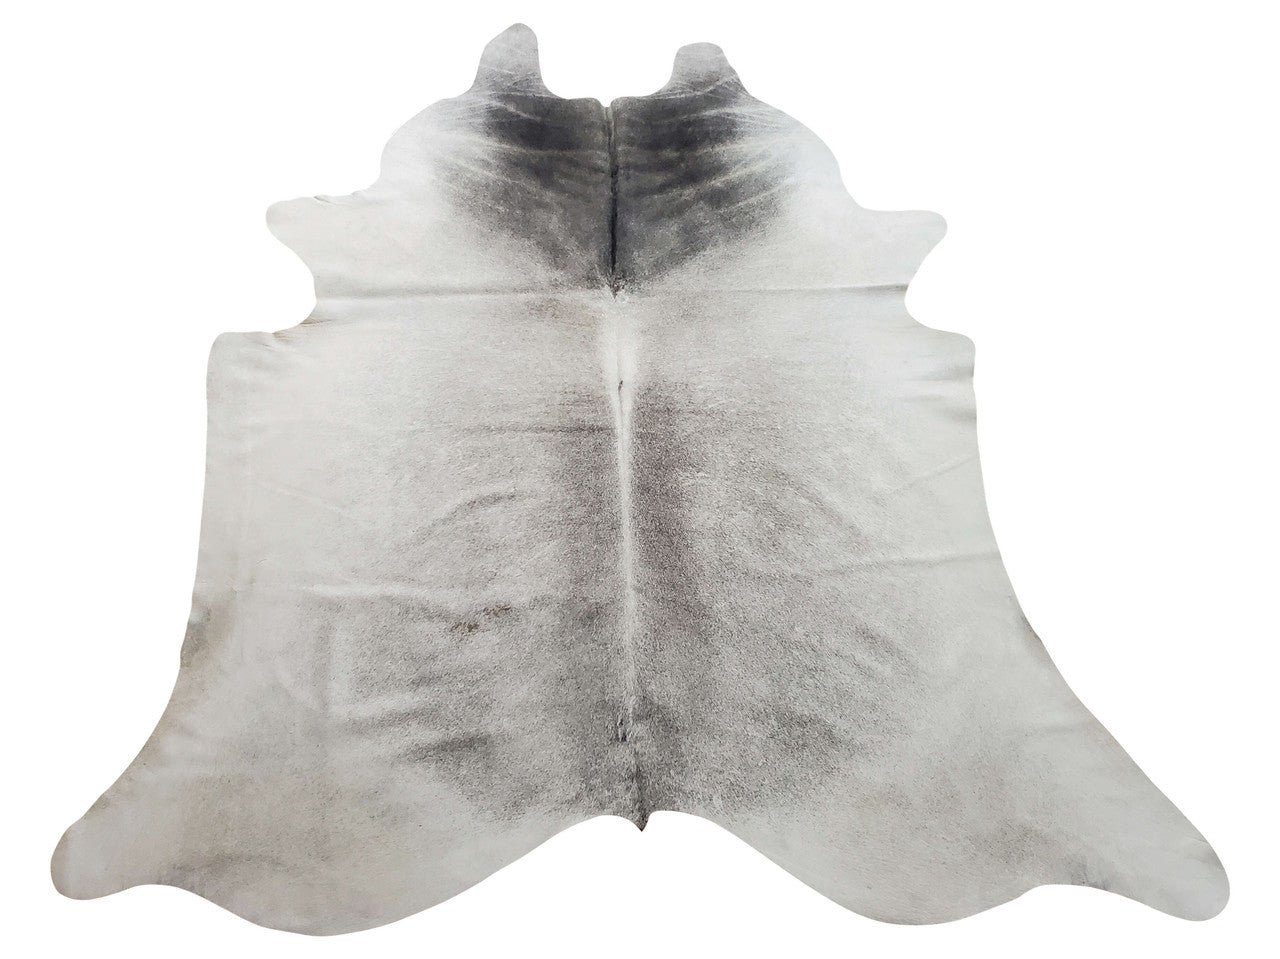 Keep it straightforward with this light grey cowhide rug, which is easy and refined in design. The Brazilian cowhide rugs are excellent complements for Bohemian, country, or rustic decors.
